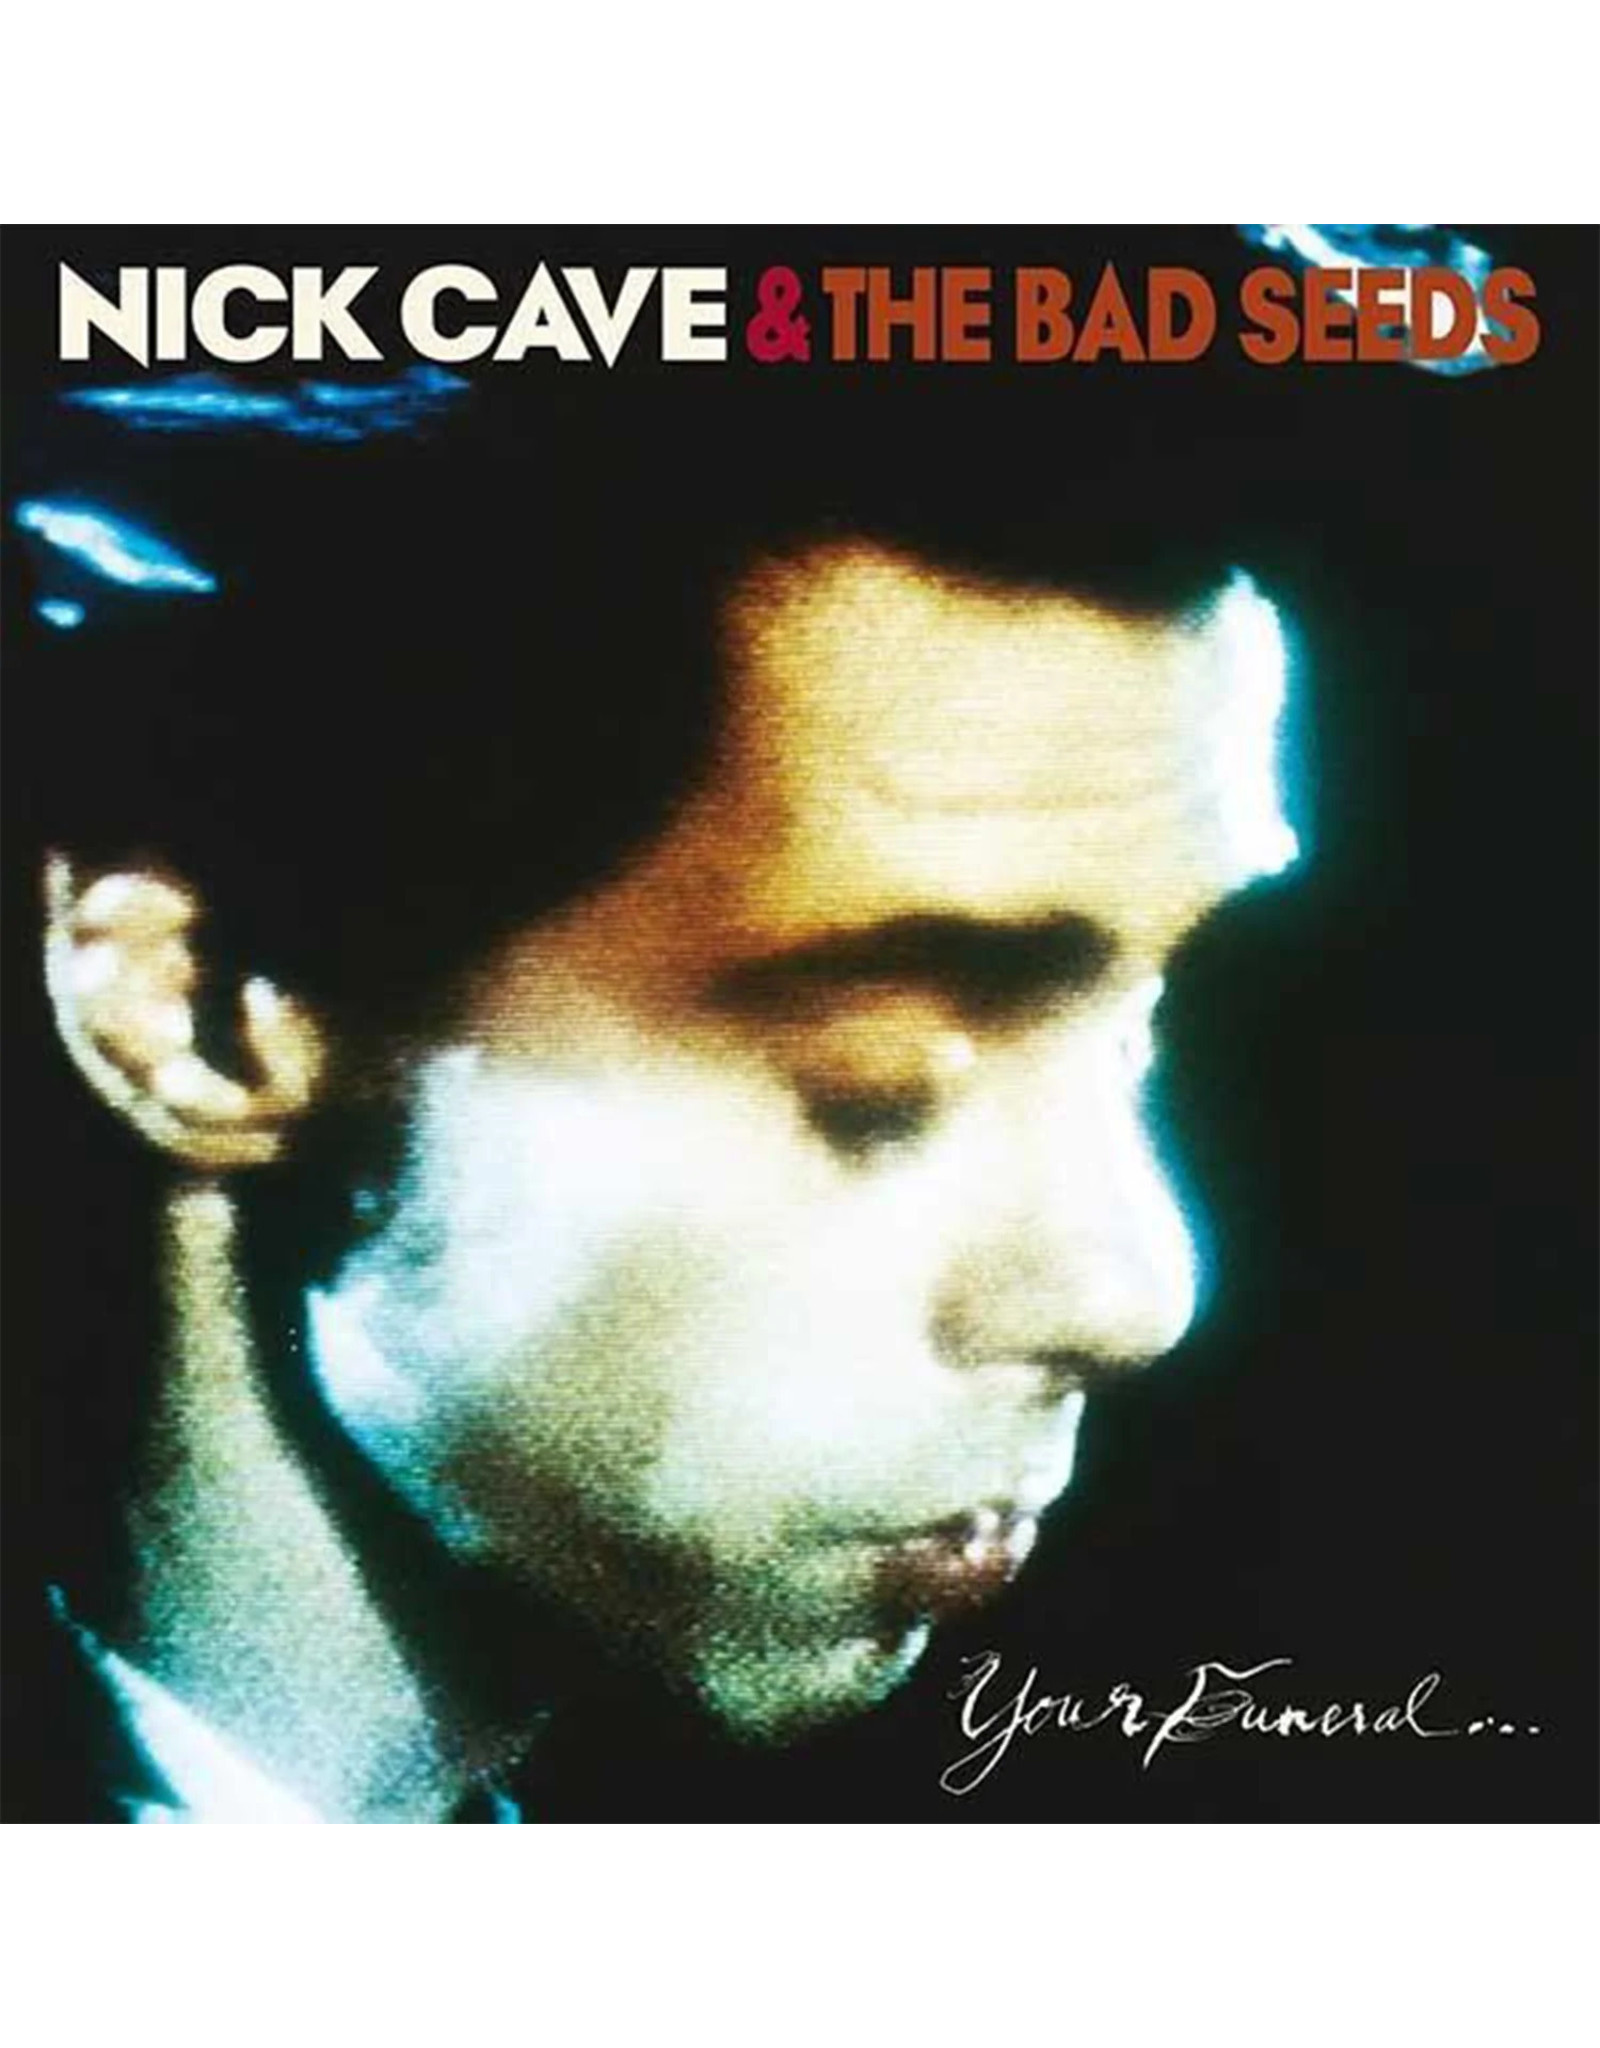 Cave, Nick & the Bad Seeds: Your Funeral... My Trial LP